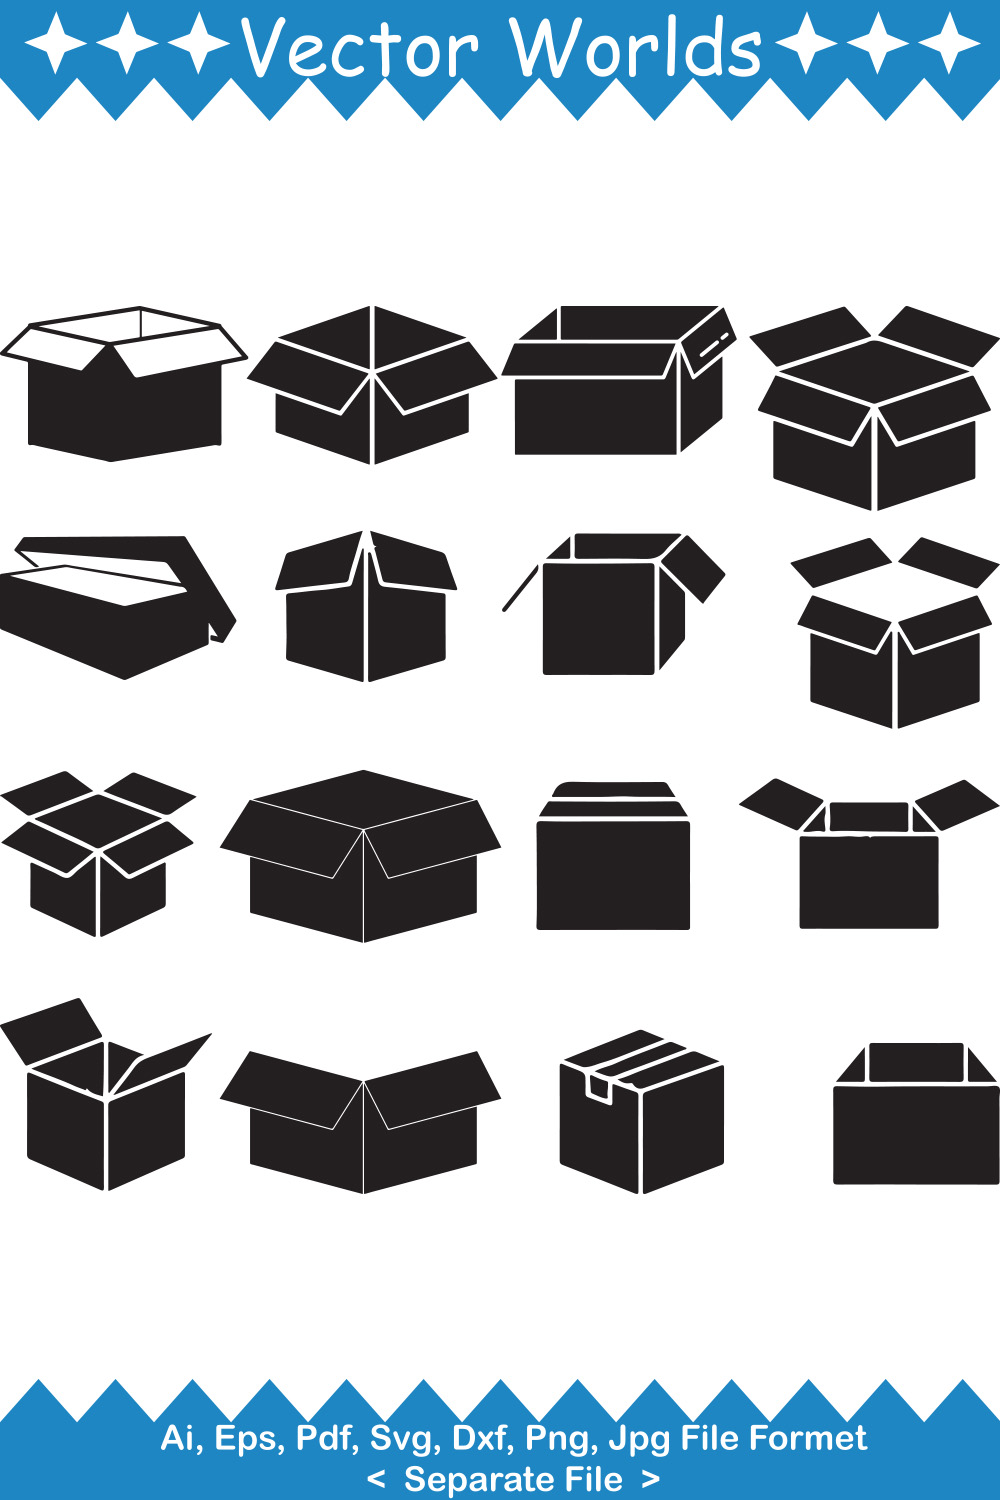 A selection of amazing vector images of cardboard boxes.